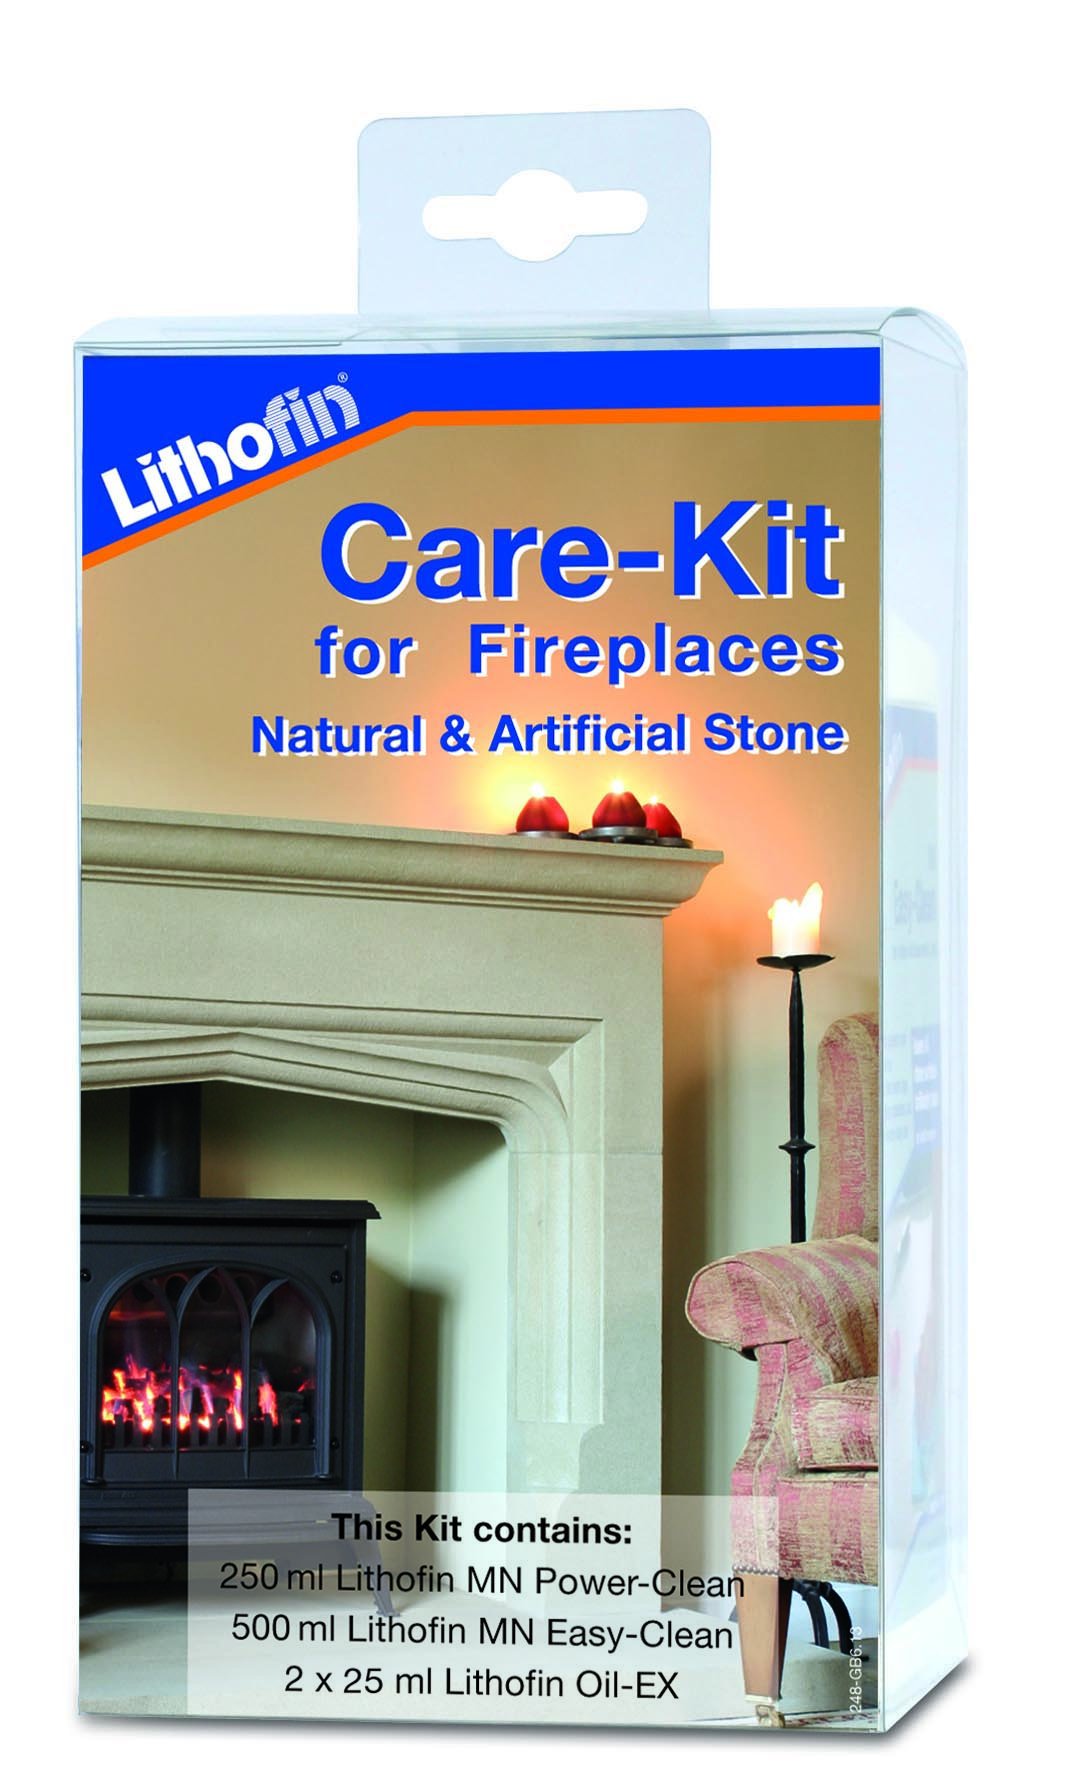 Maintenance Kit for Natural and Artificial Stone Fireplaces